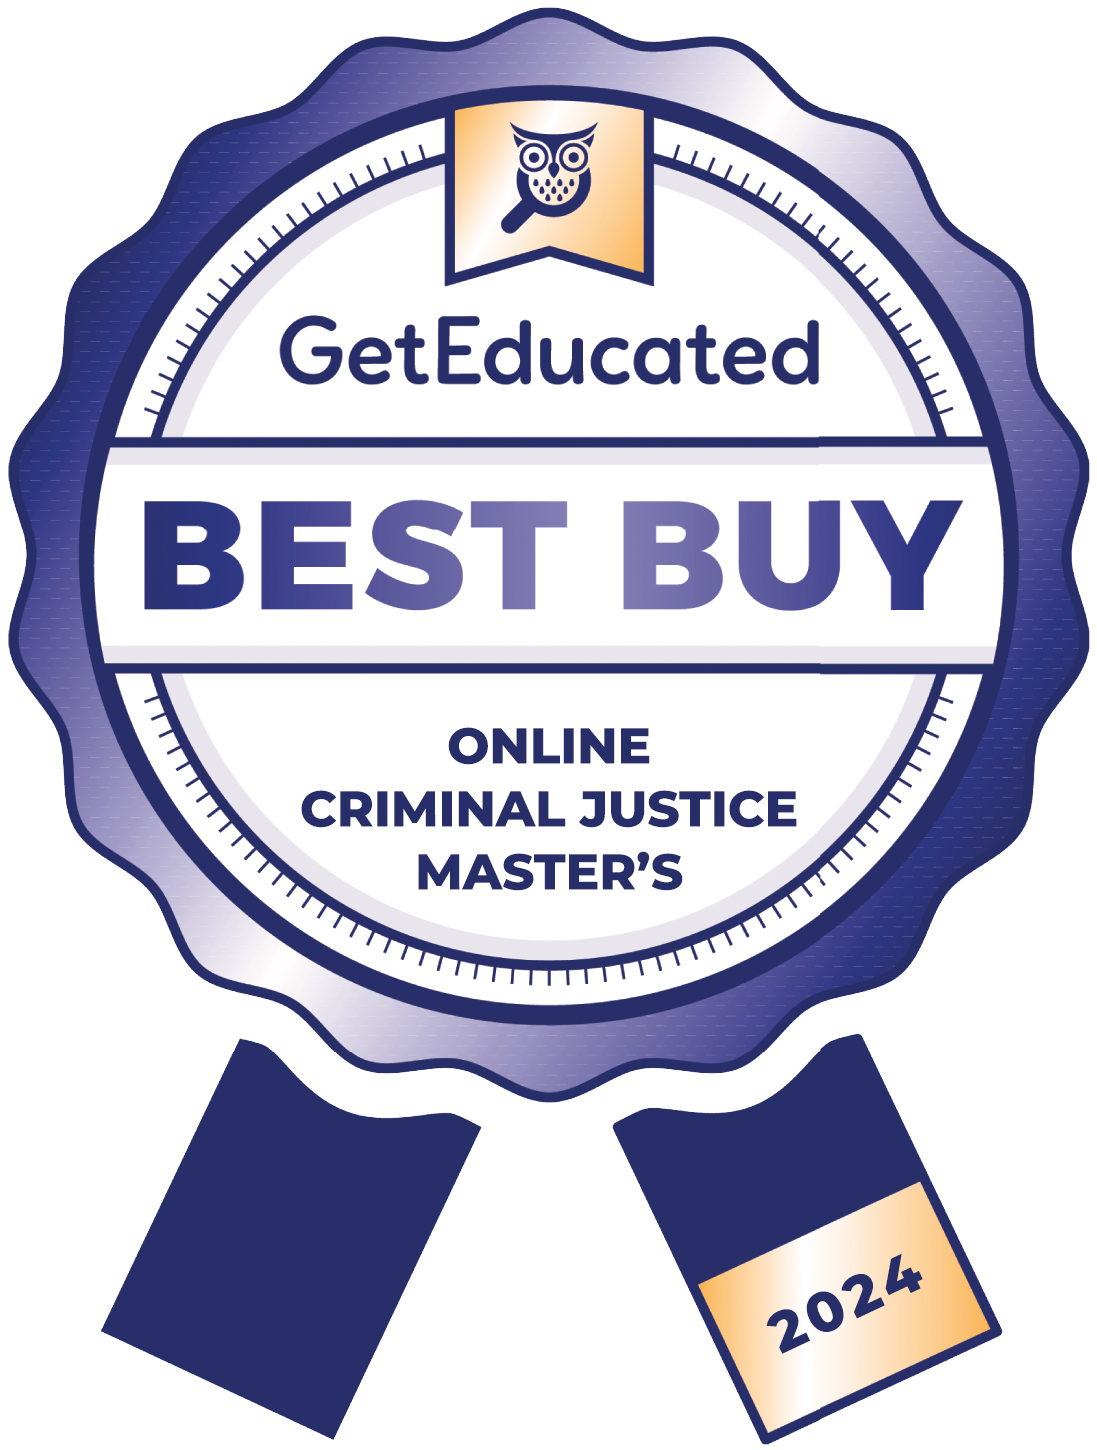 Rankings of the cheapest online criminal justice master's programs